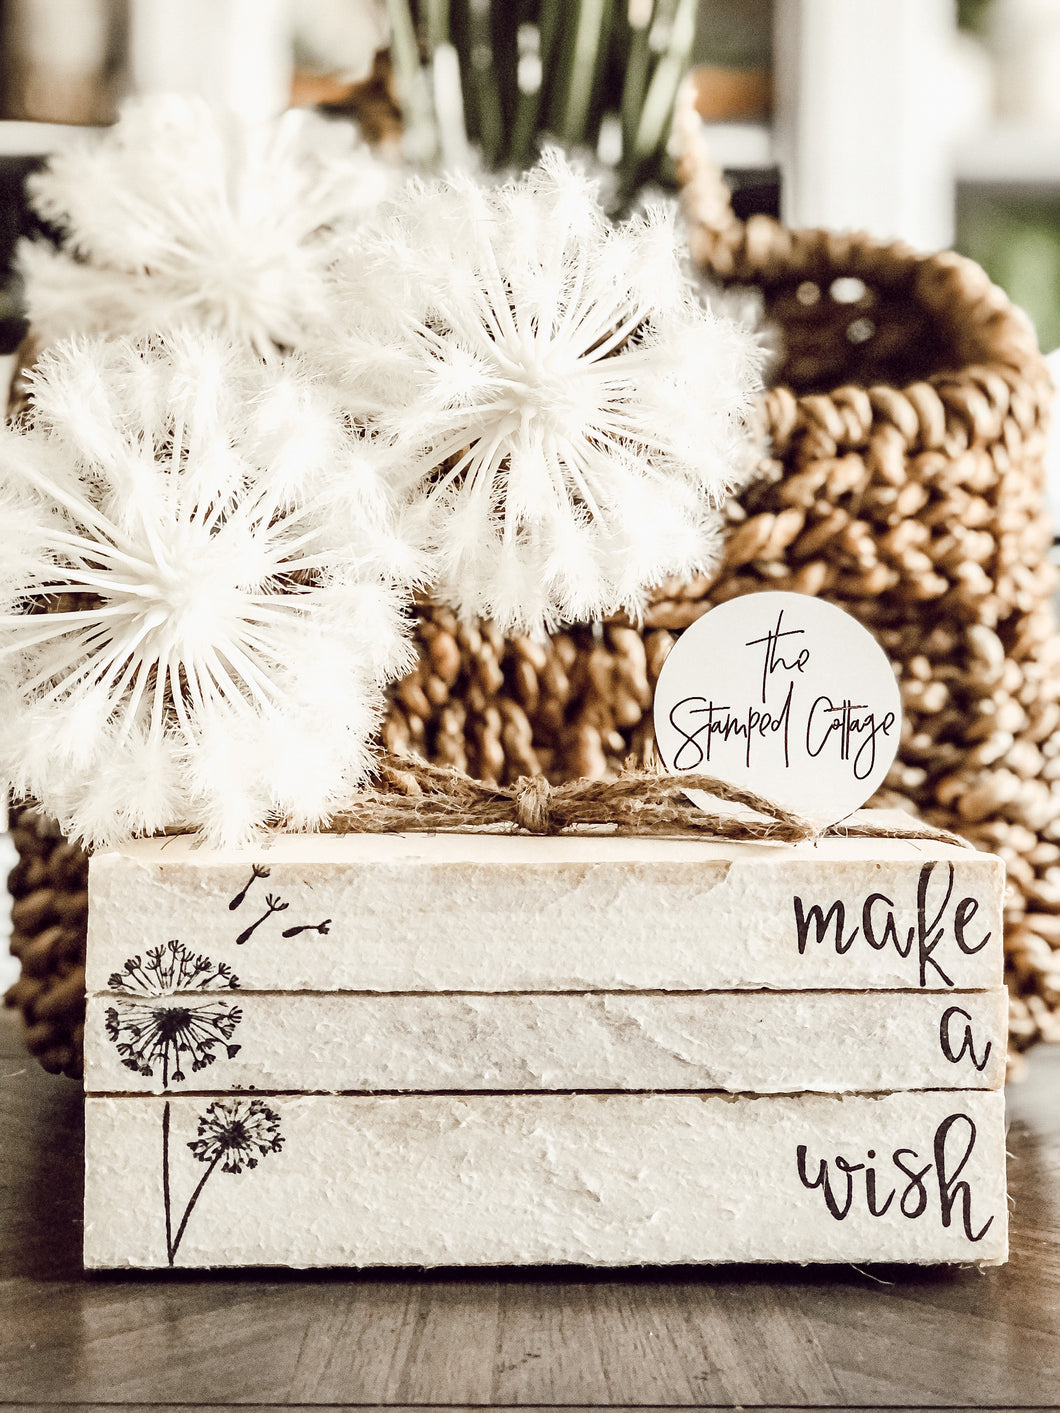 Stamped Book Stack - Make a wish with a fuzzy dandelion